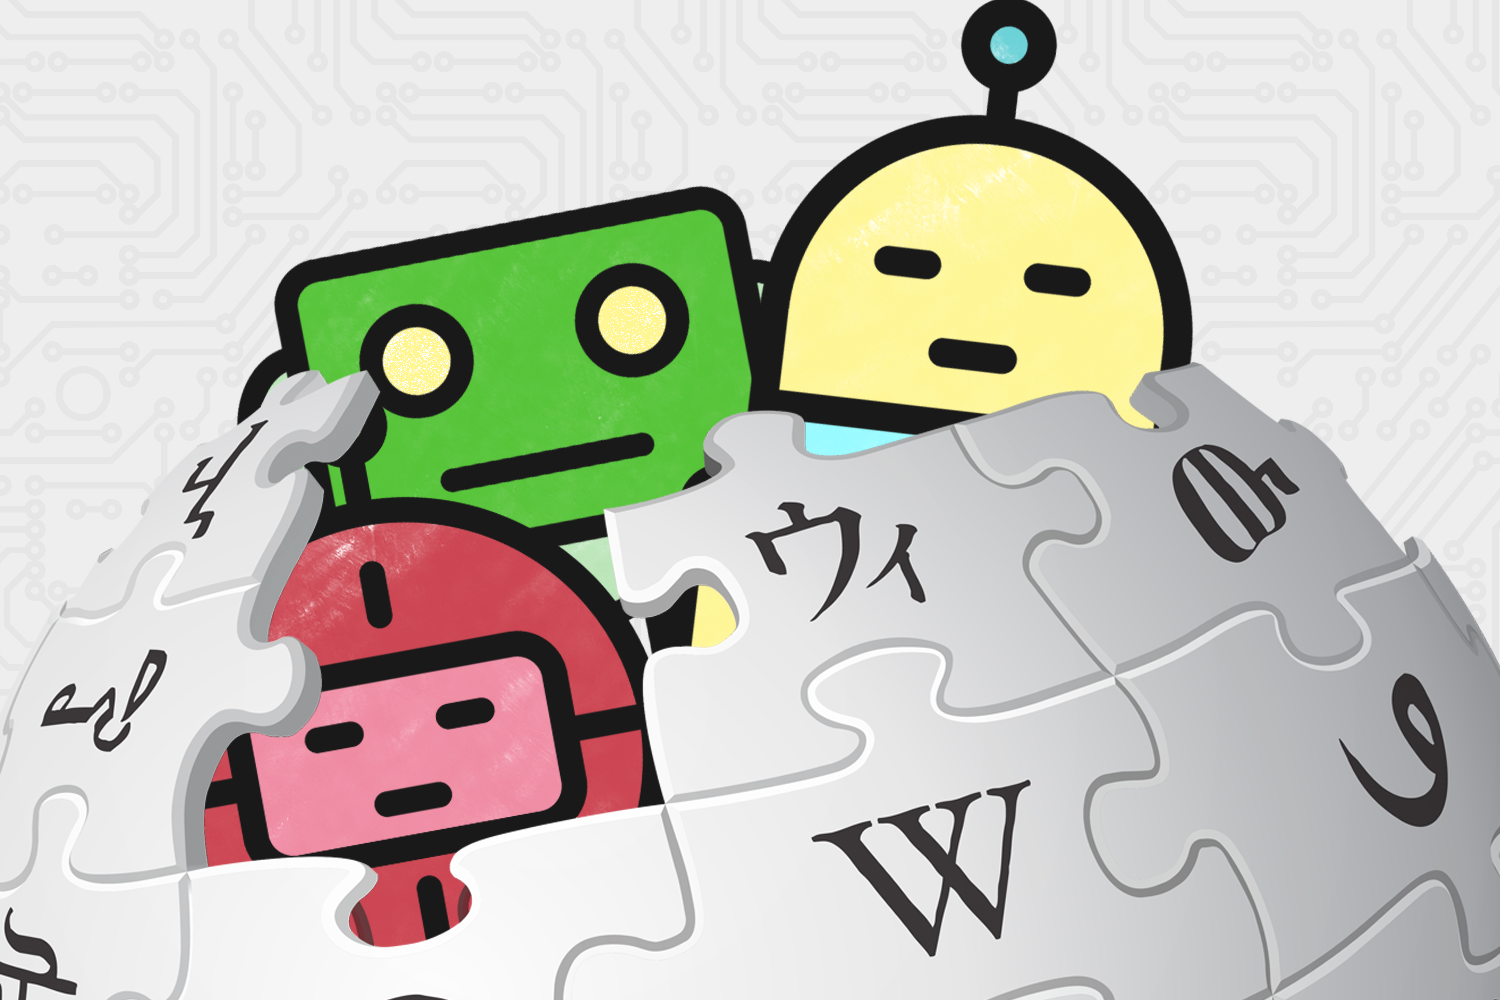 The Bots that Work Behind the Scenes to Make Wikipedia Possible